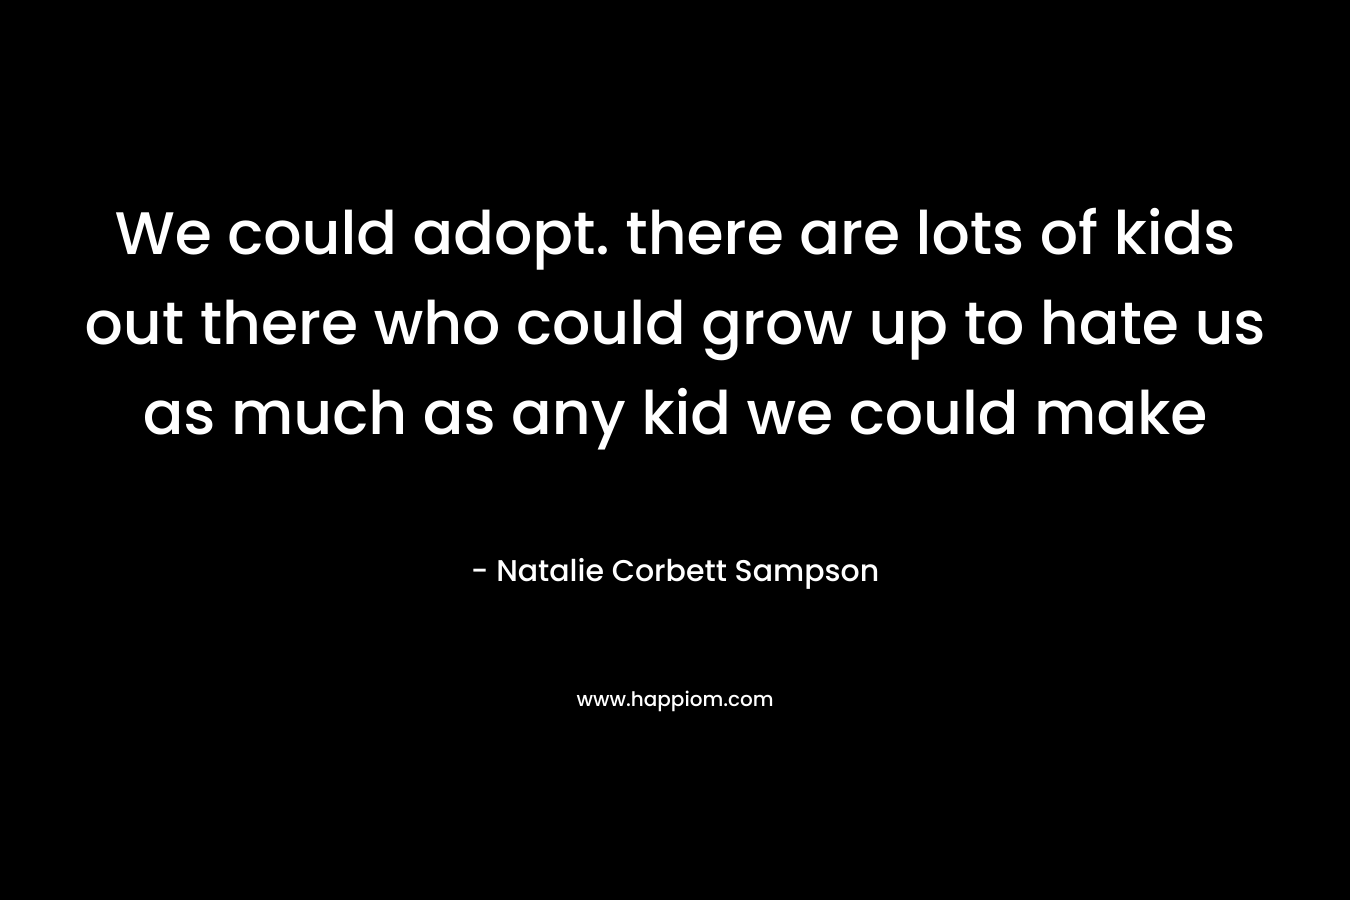 We could adopt. there are lots of kids out there who could grow up to hate us as much as any kid we could make – Natalie Corbett Sampson